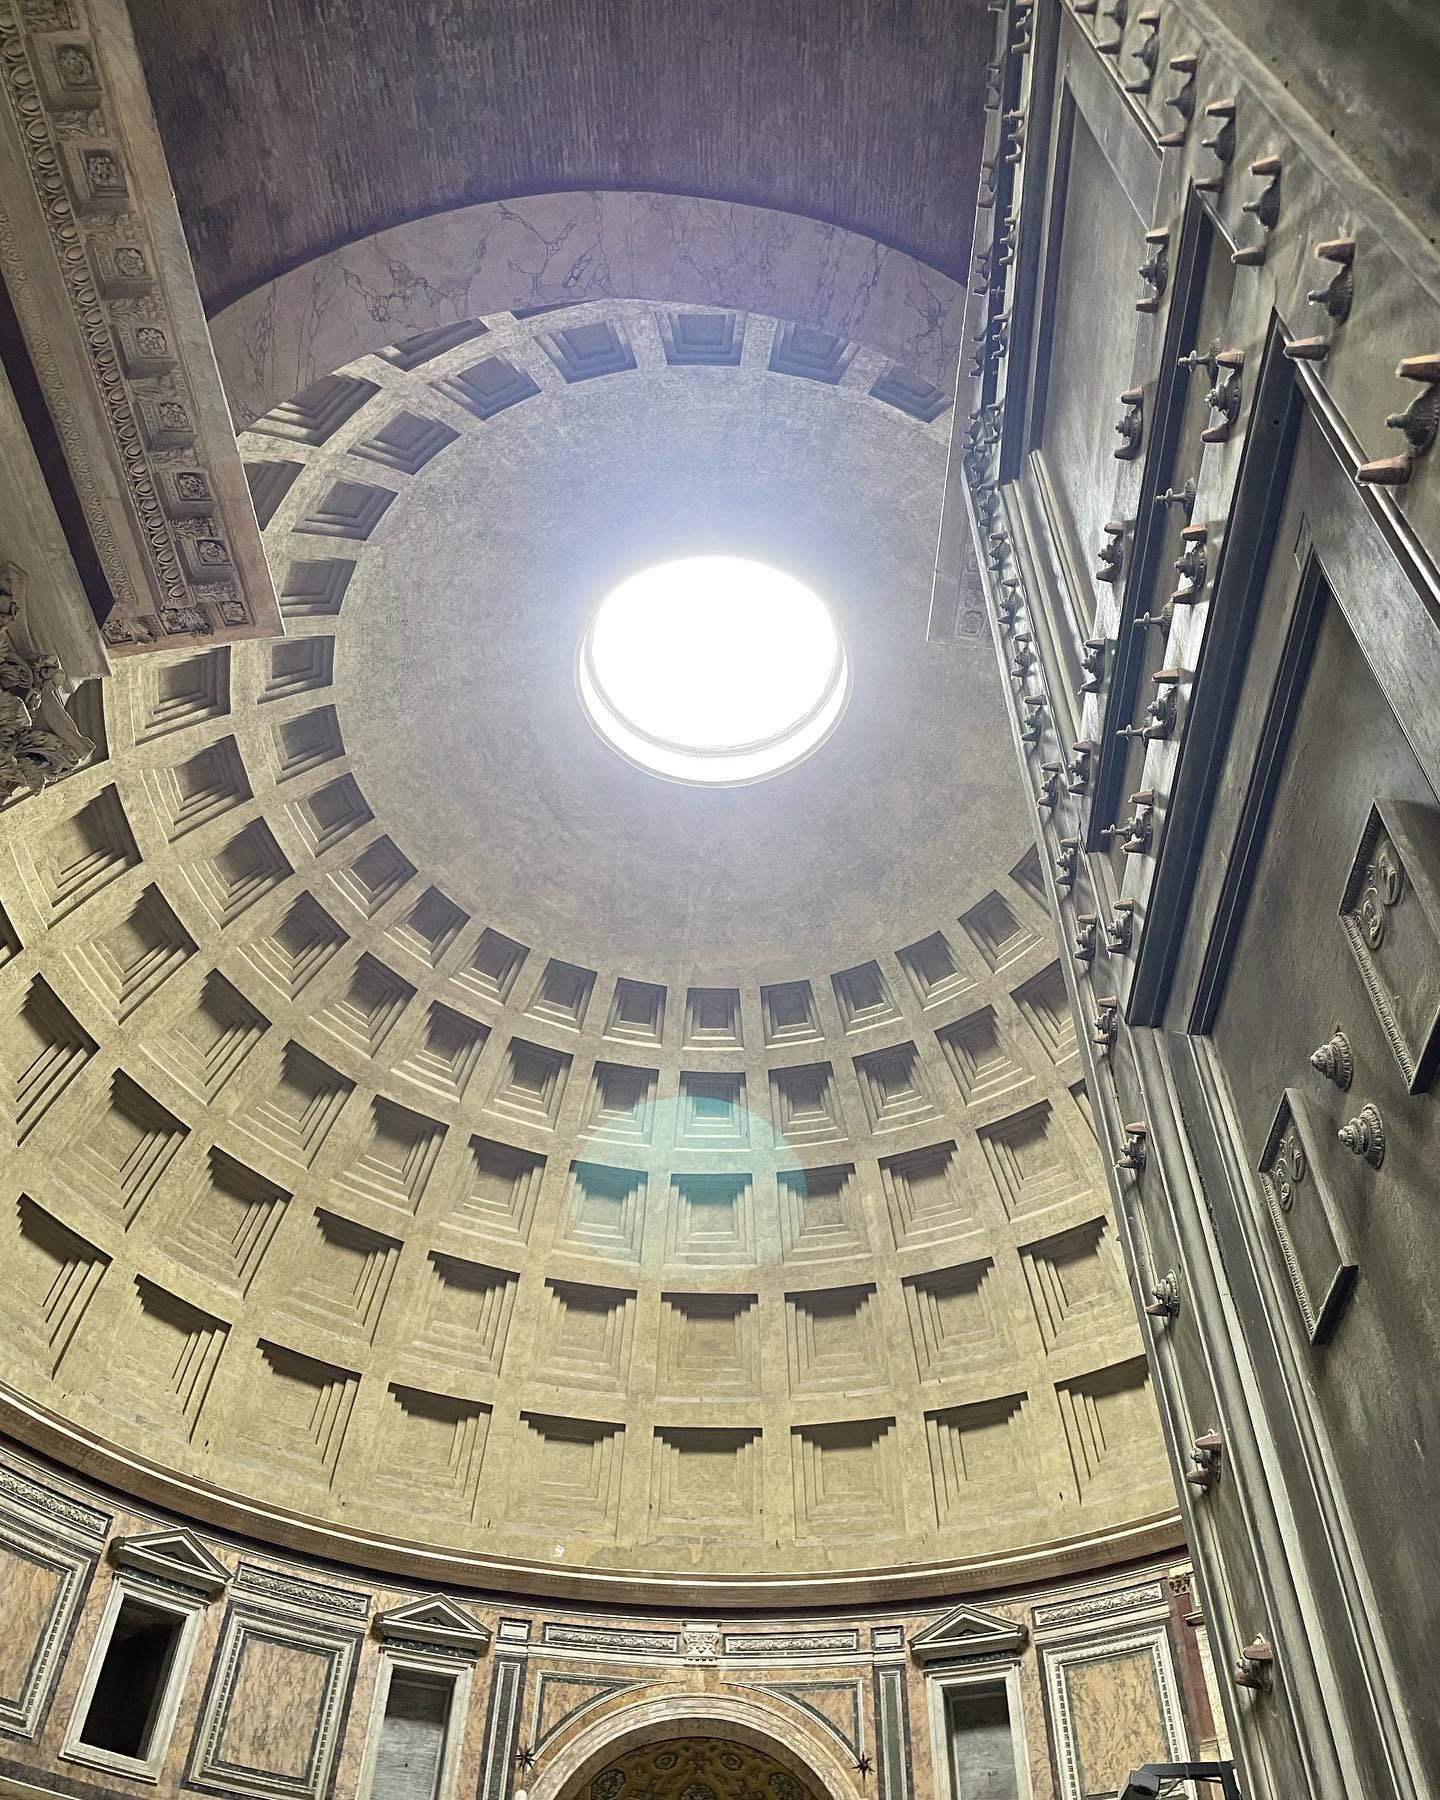 May be an image of the Pantheon